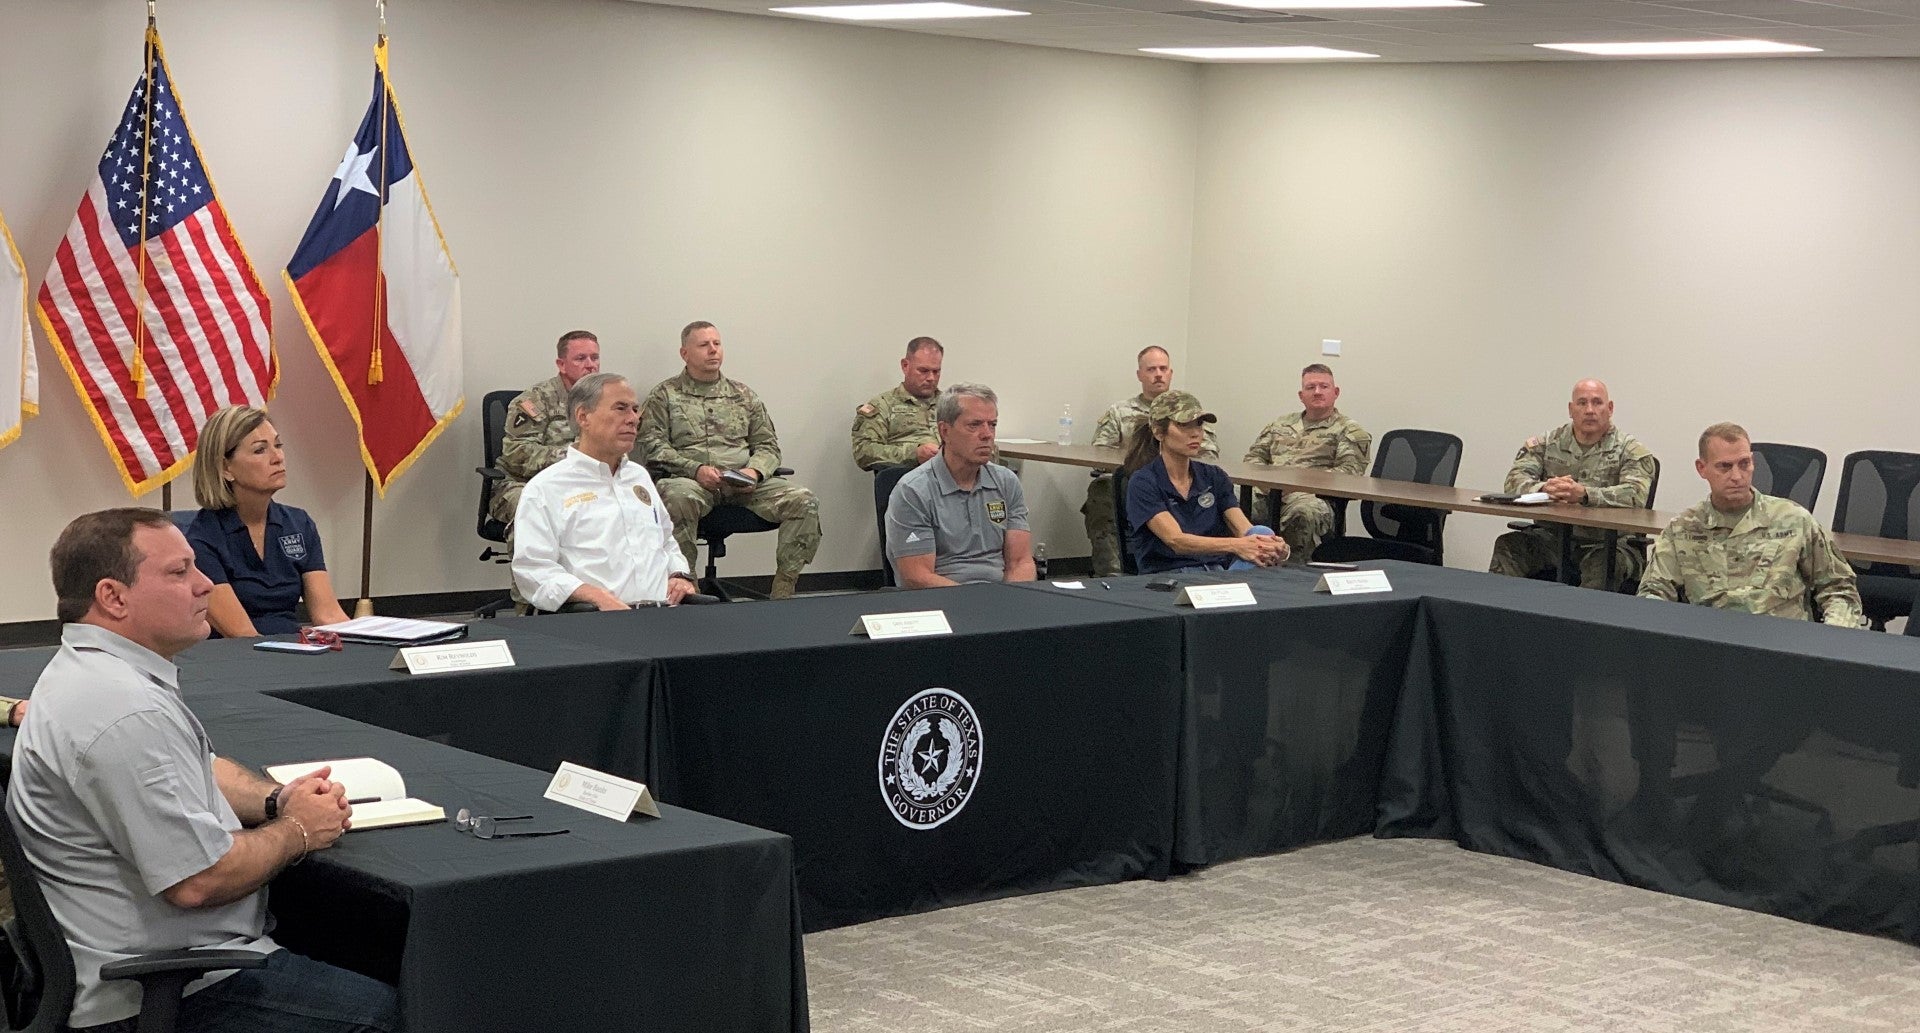 Governor Jim Pillen joined Republican governors for a series of border security briefings